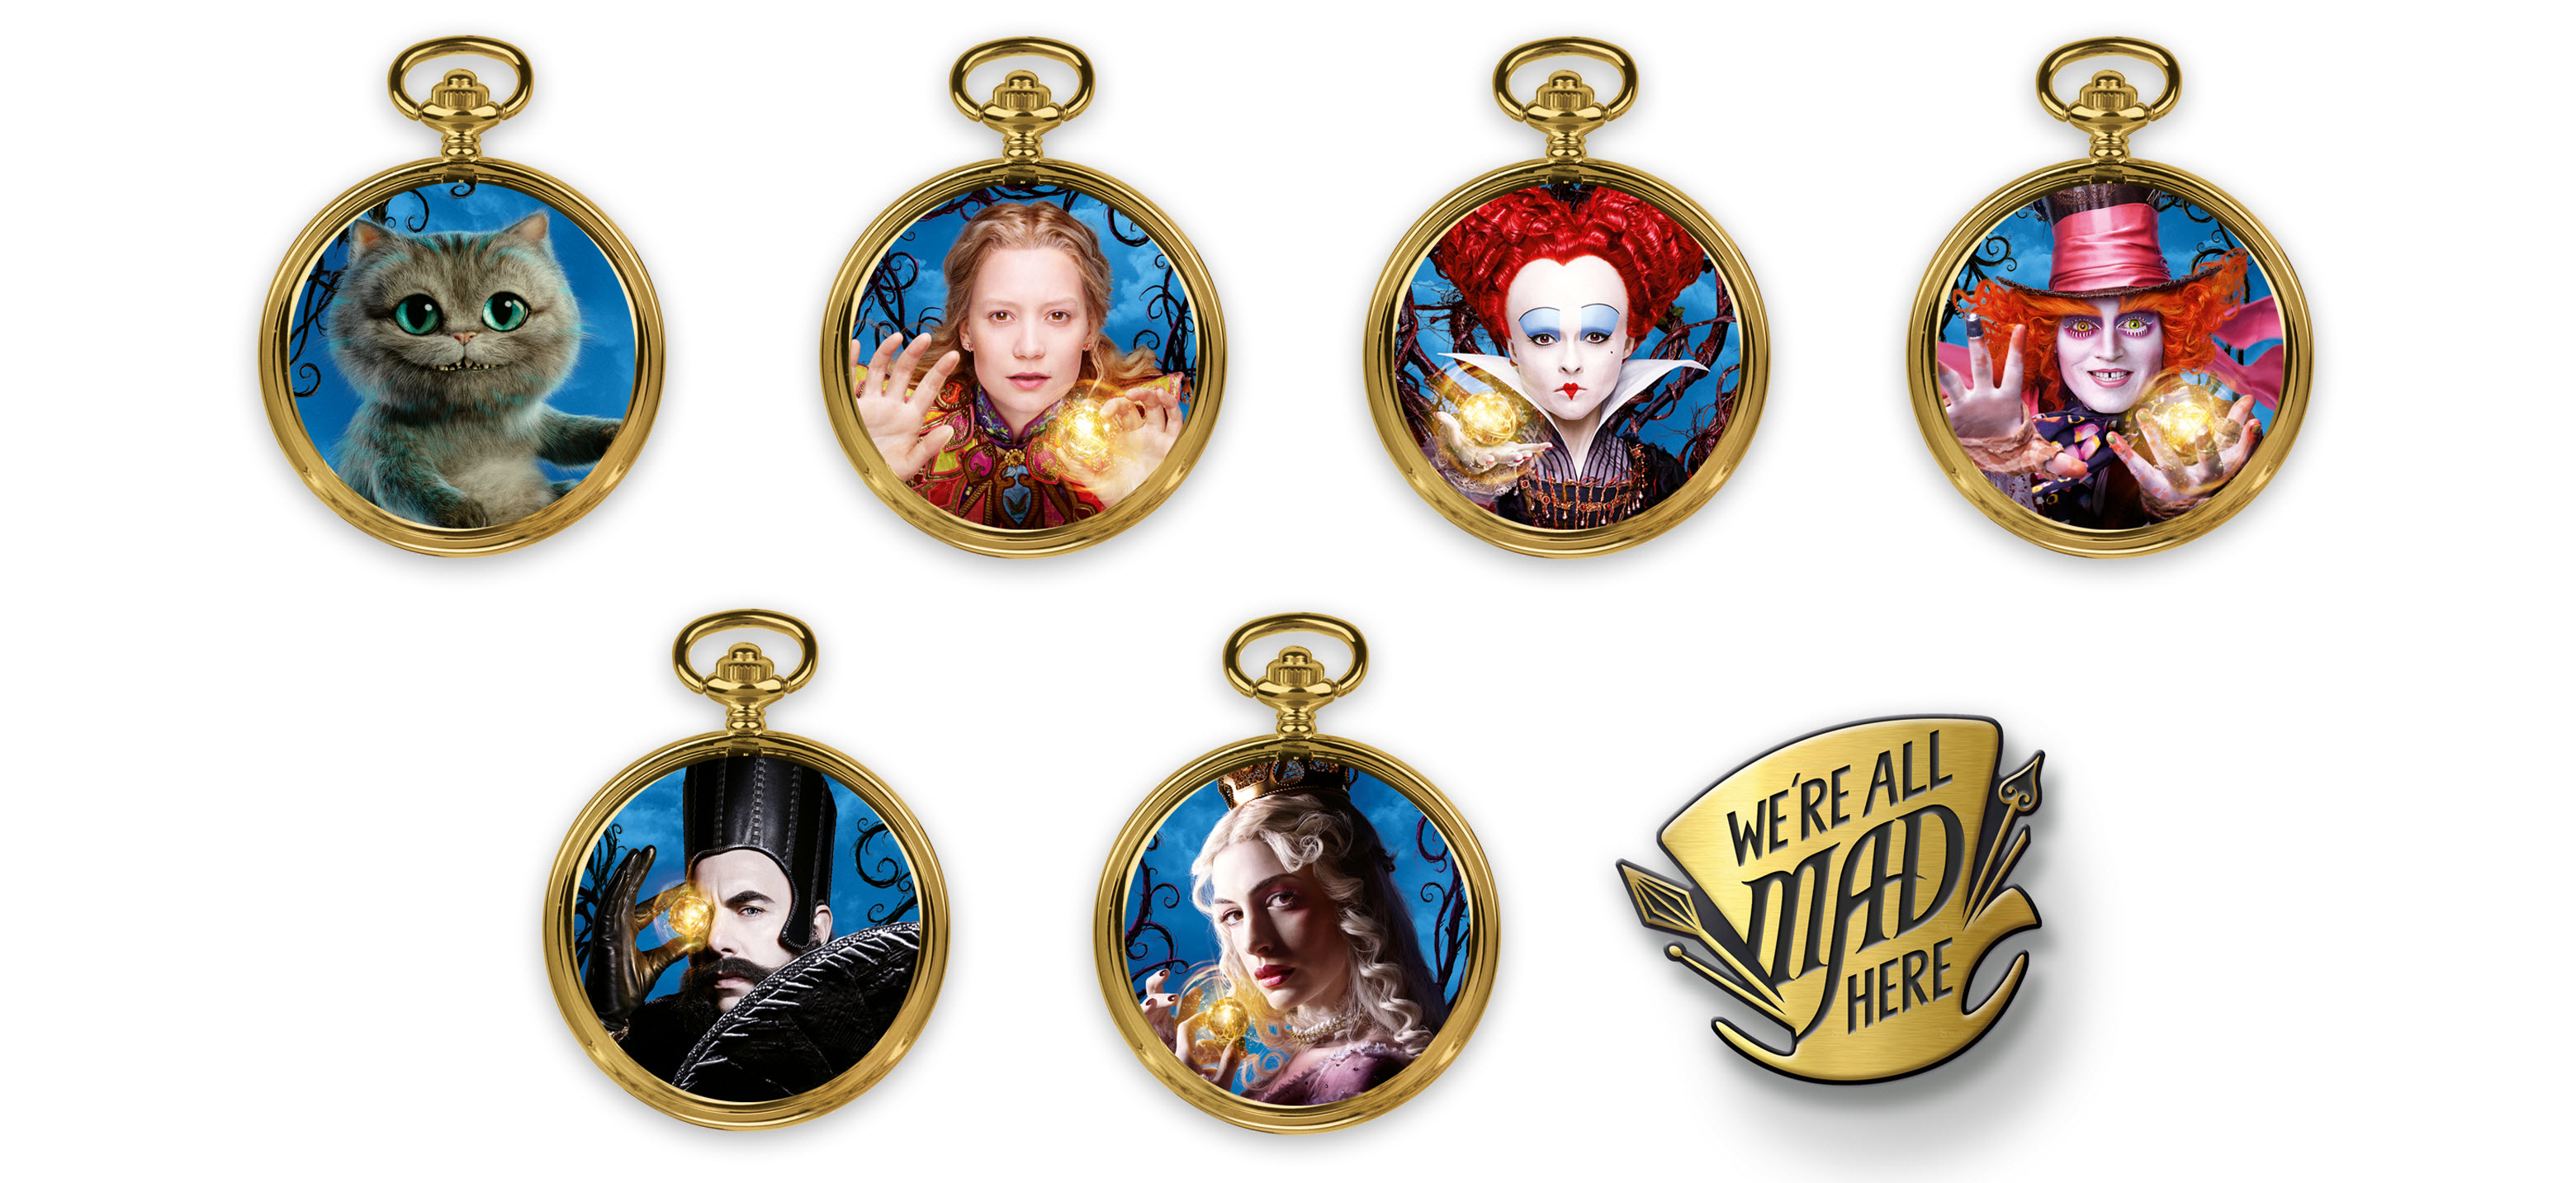 Alice Through The Looking Glass Pins Released At Amc Imax Theatres 